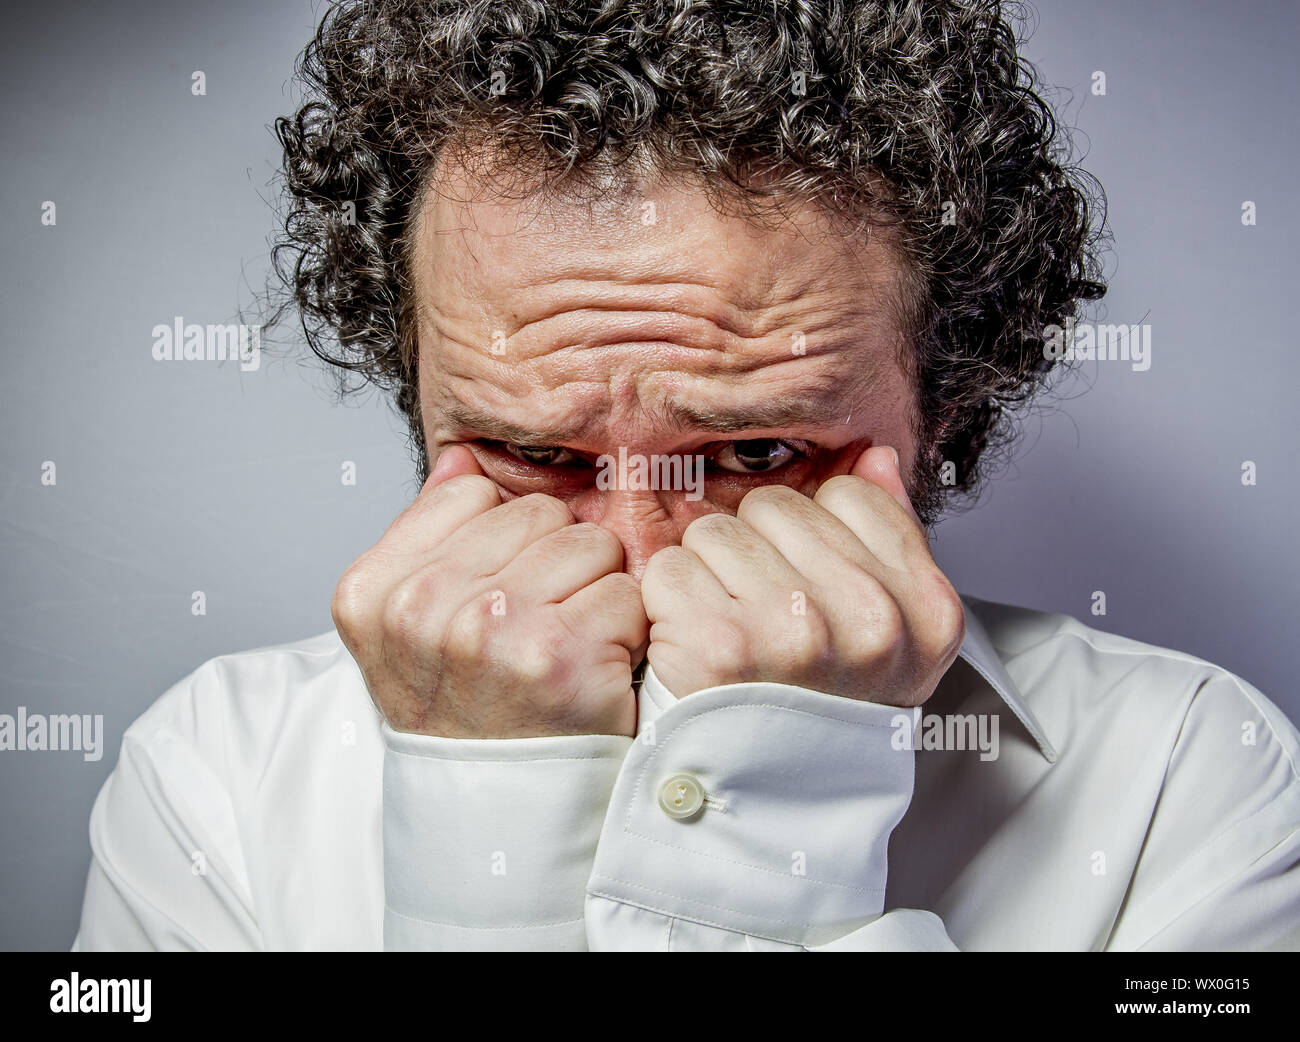 Fear, man with intense expression, white shirt Stock Photo